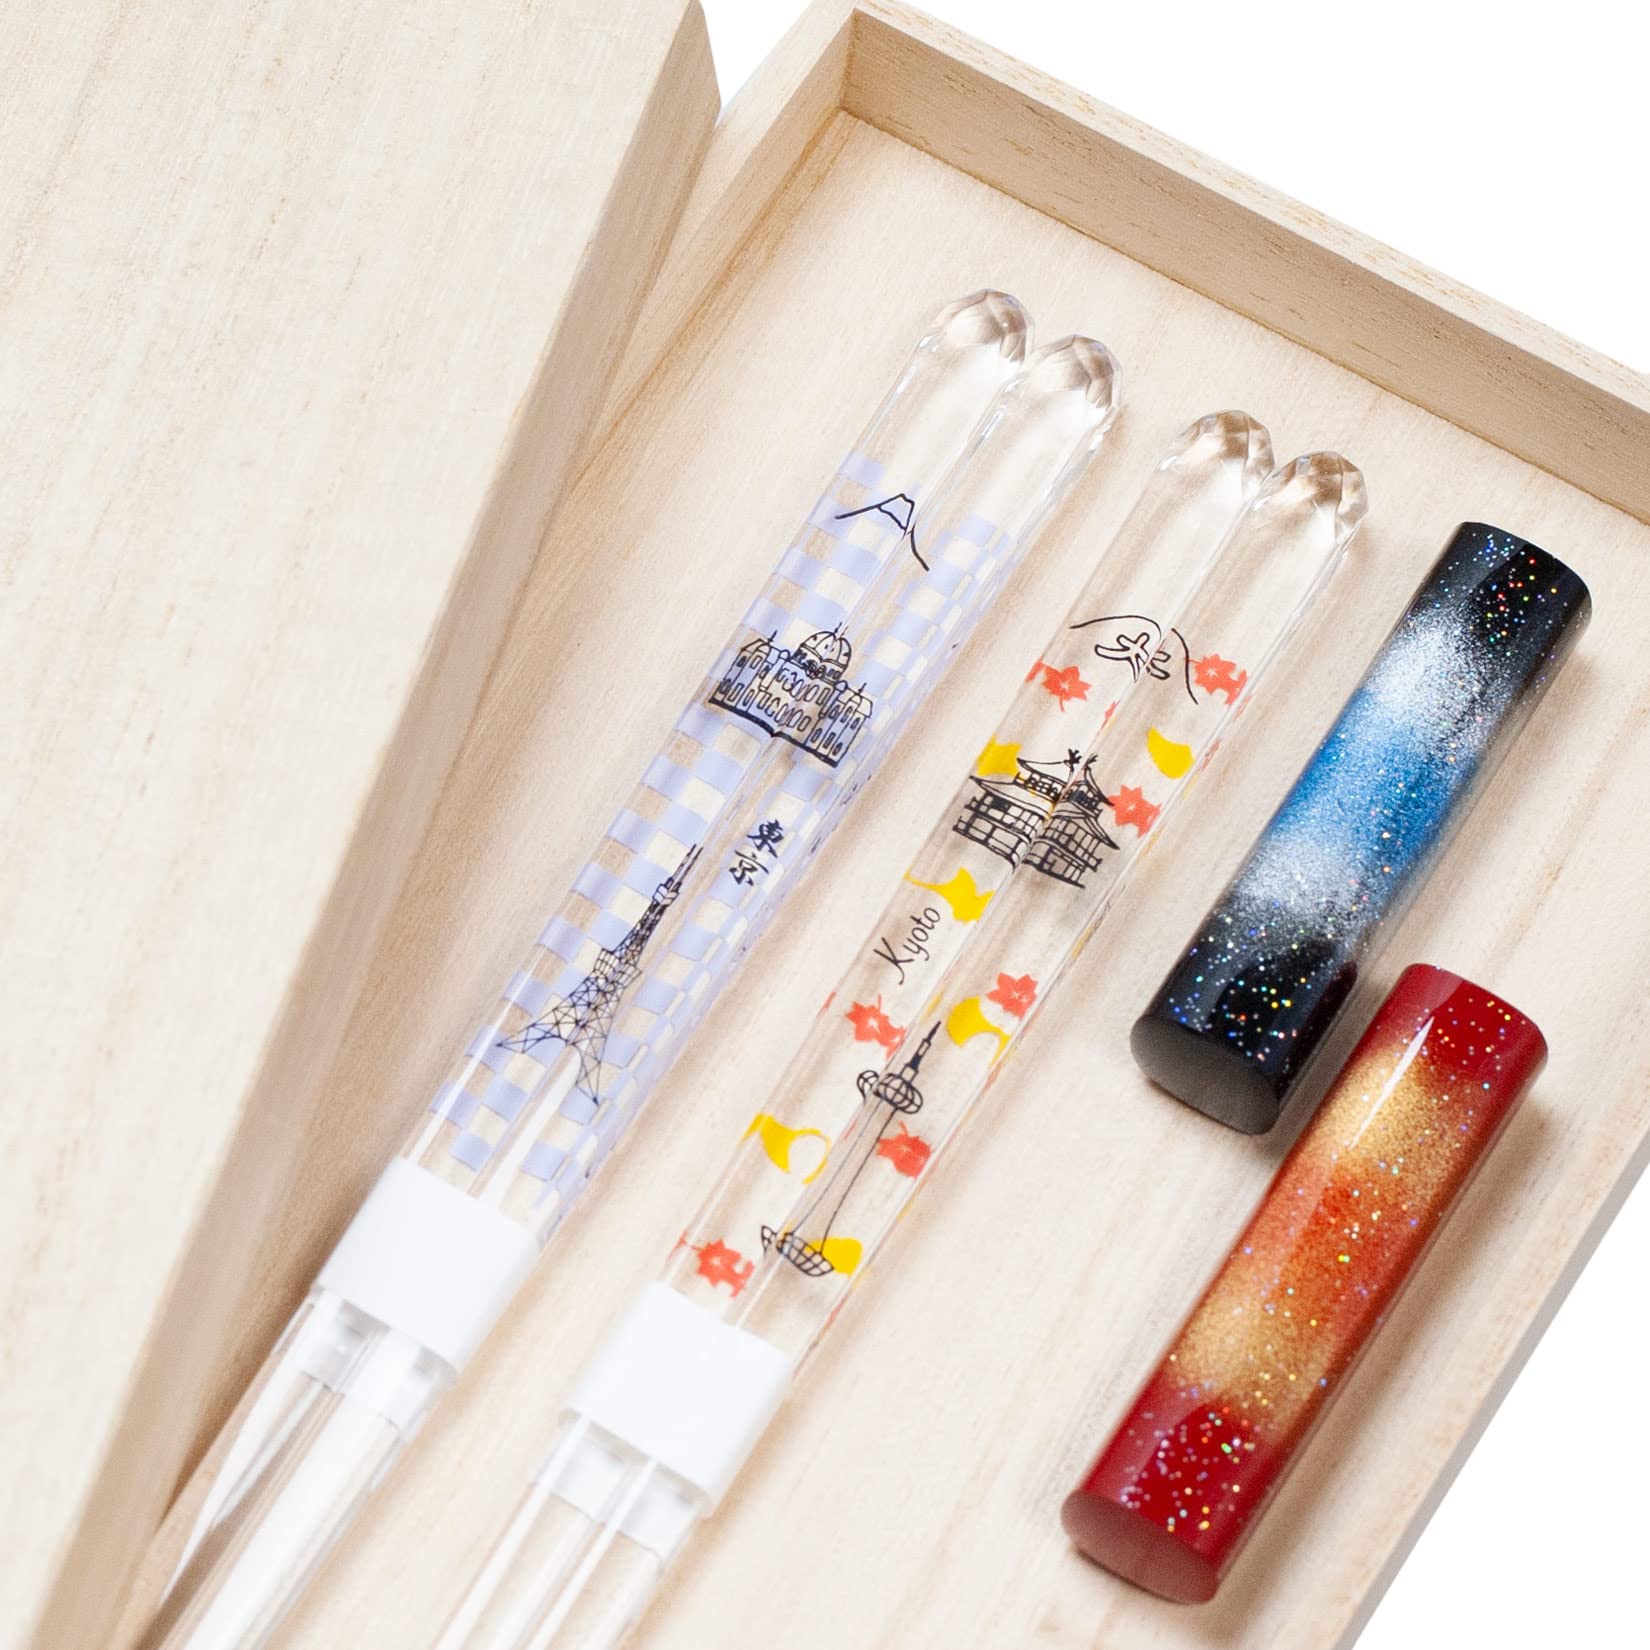 Aoba Japanese Wooden Chopsticks Reusable 2 Pairs in Gift Box Purple and Orange Dishwasher-safe (Tokyo and Kyoto) [ Made in Japan /Handcrafted ]